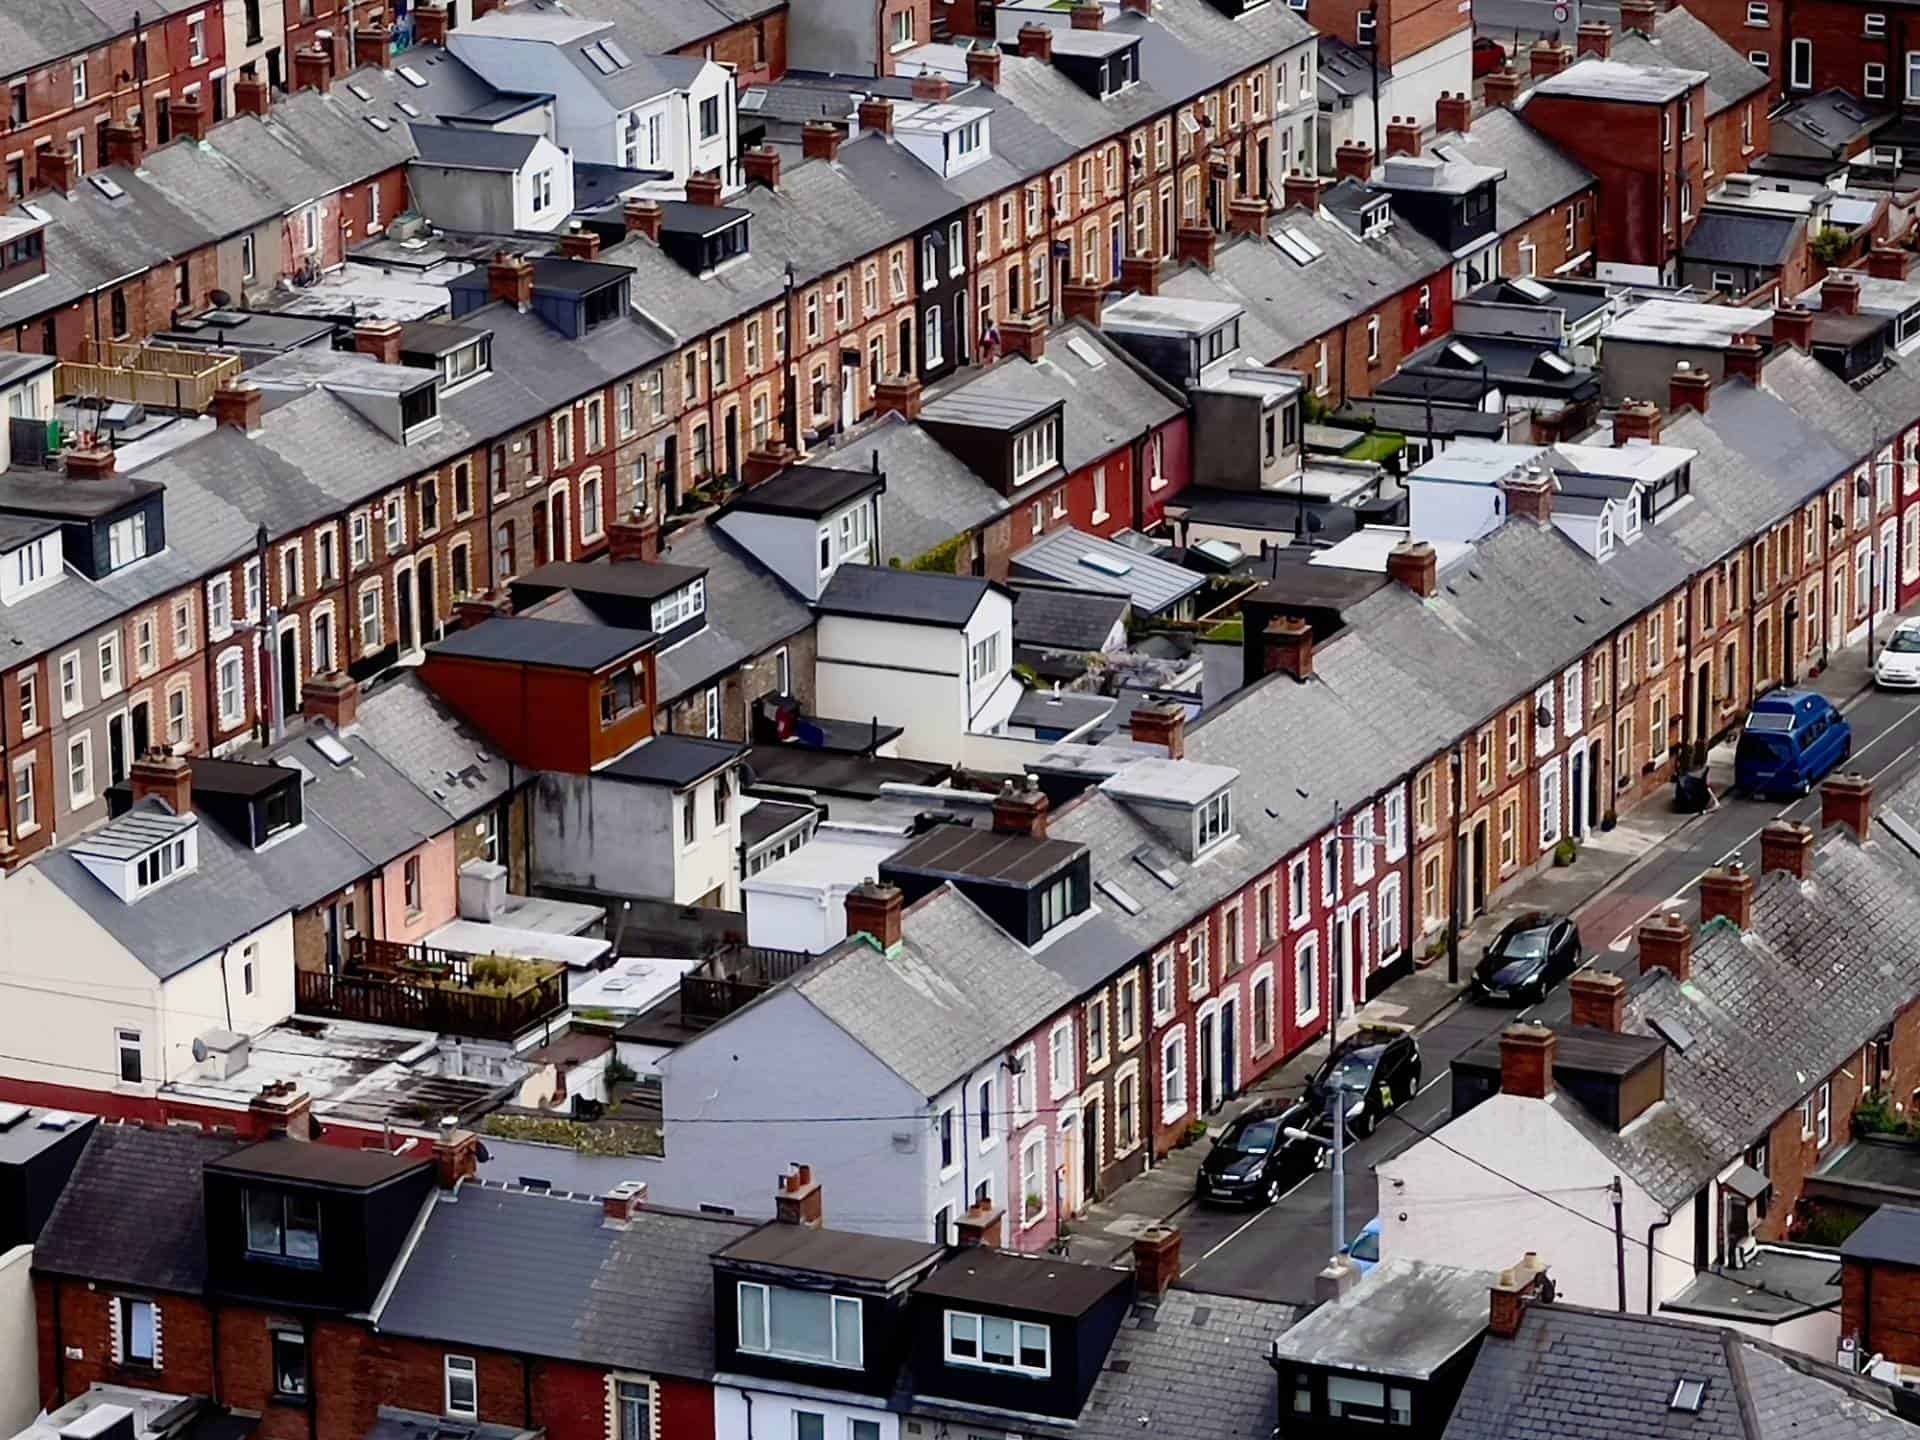 An aerial view of colorful houses in a village in Dublin, Ireland.